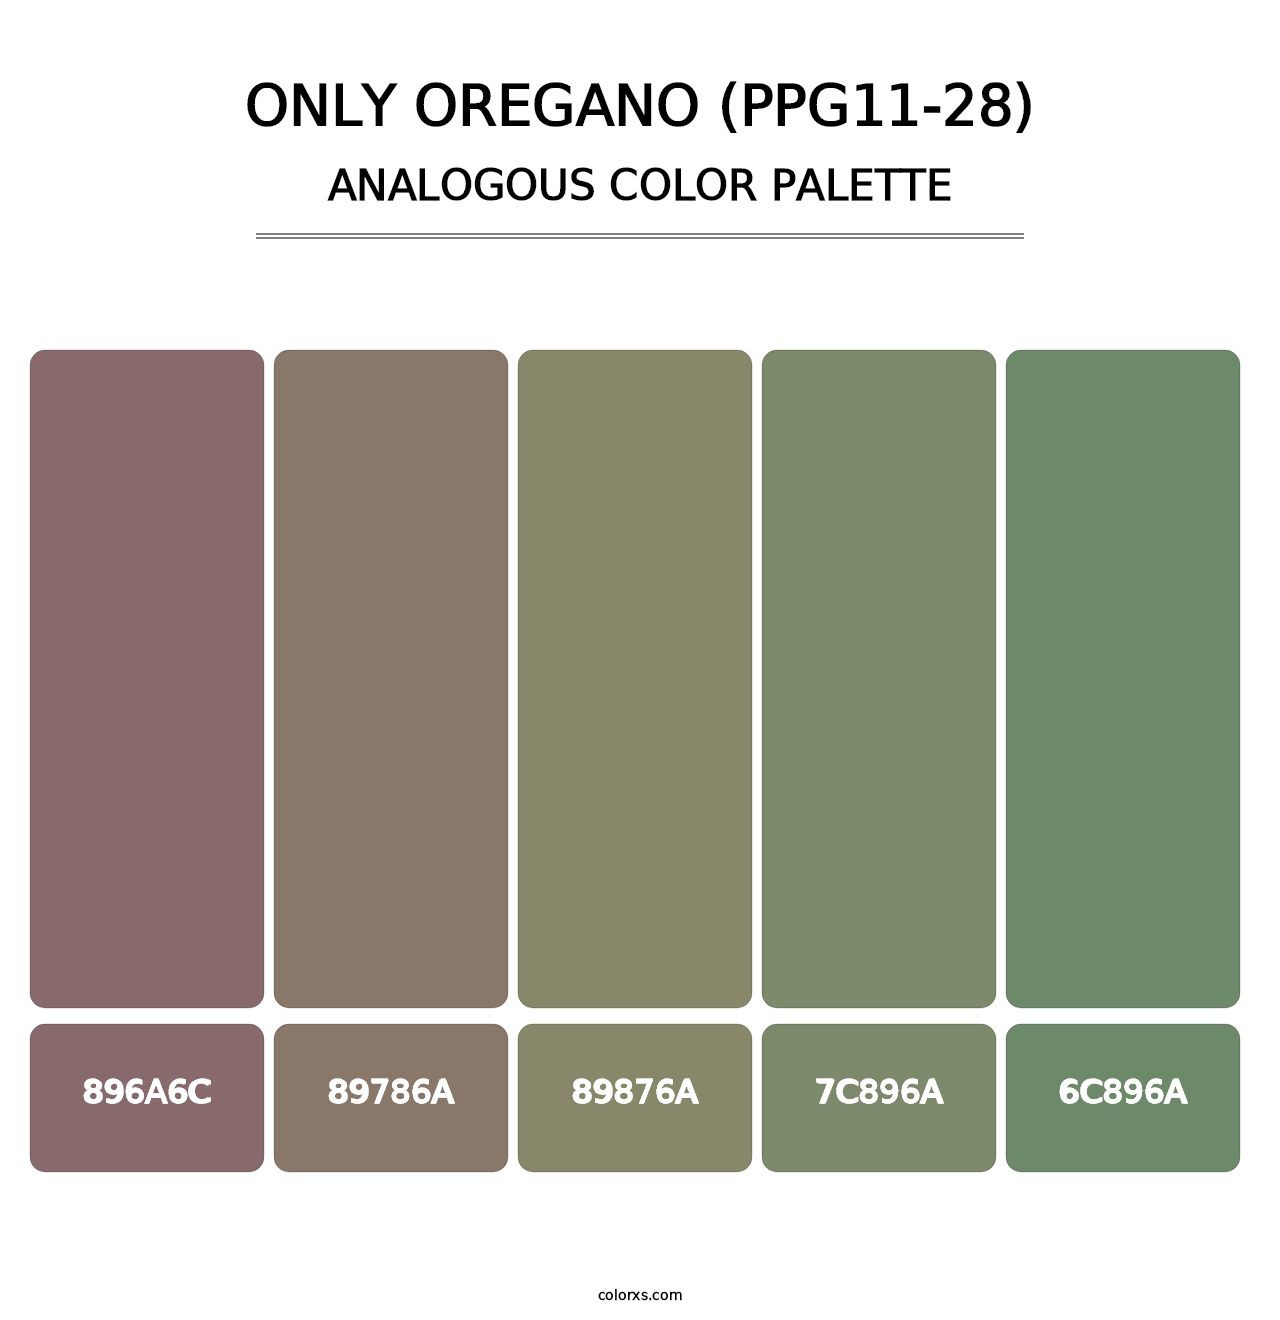 Only Oregano (PPG11-28) - Analogous Color Palette